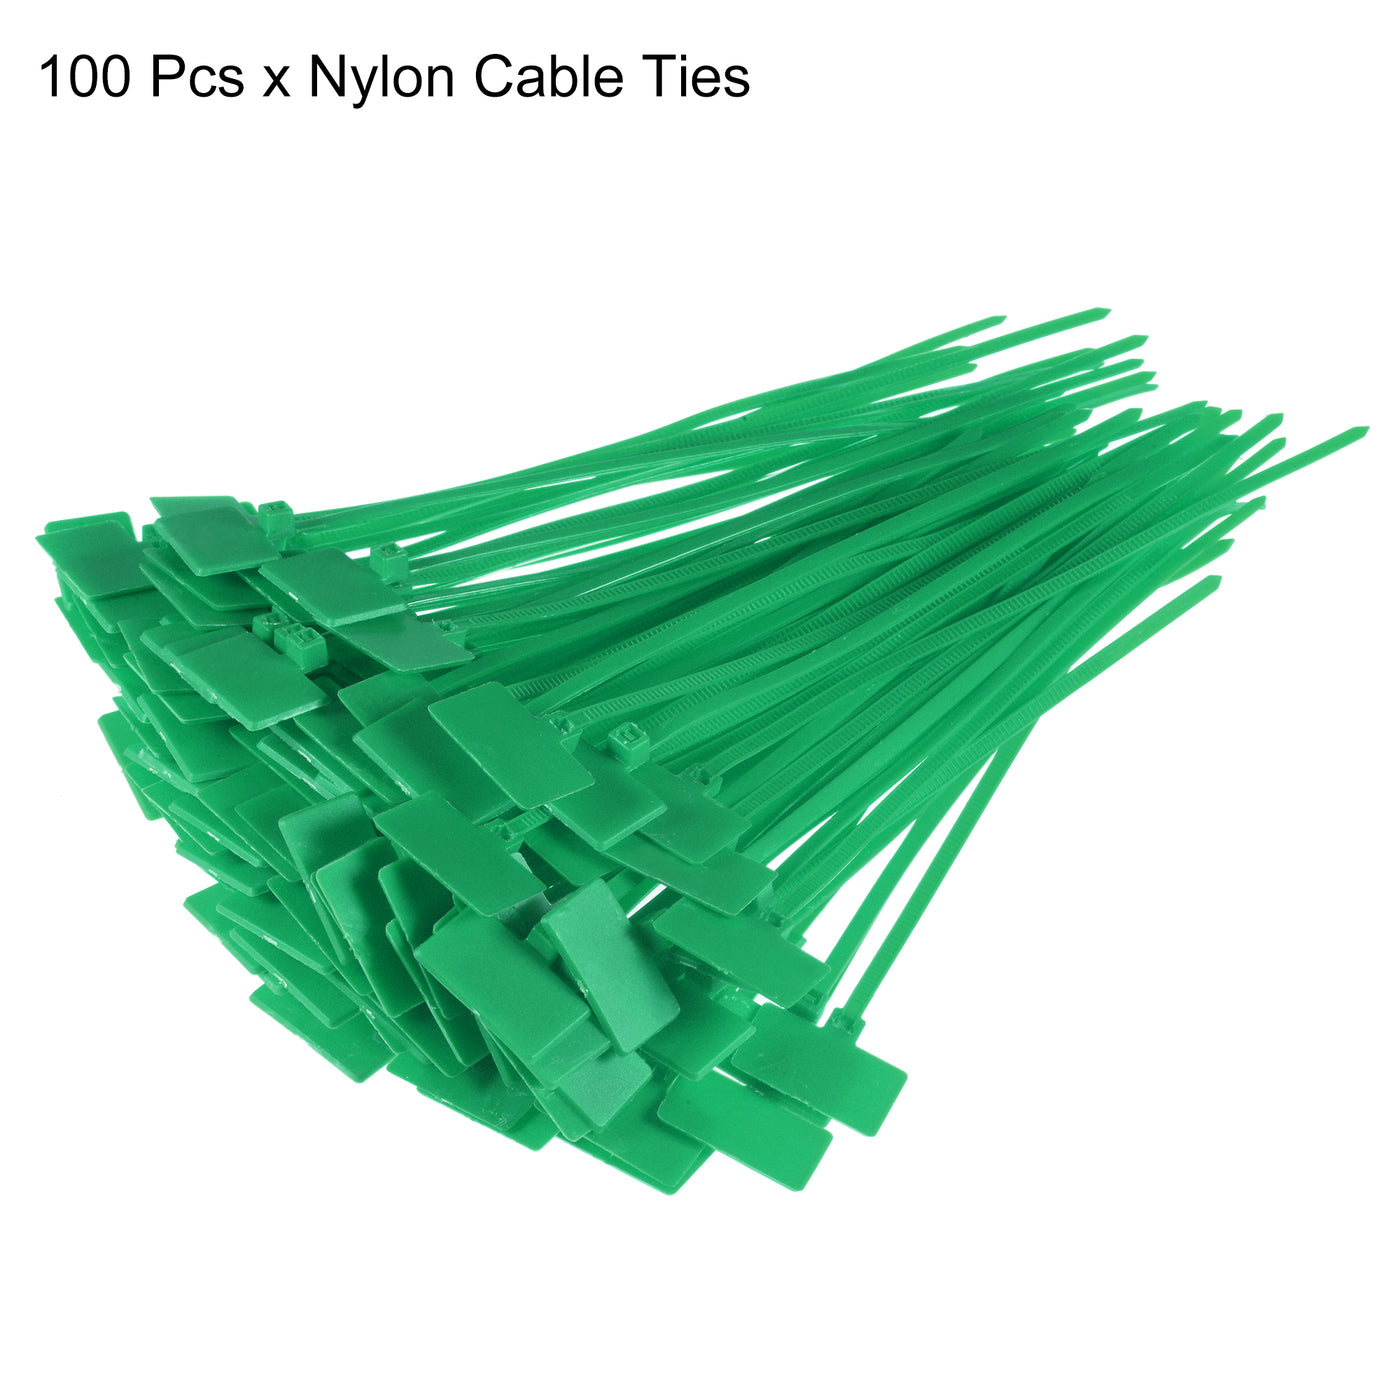 uxcell Uxcell 100pcs Nylon Cable Ties Tags Label Marker Self-Locking for Marking Organizing Green